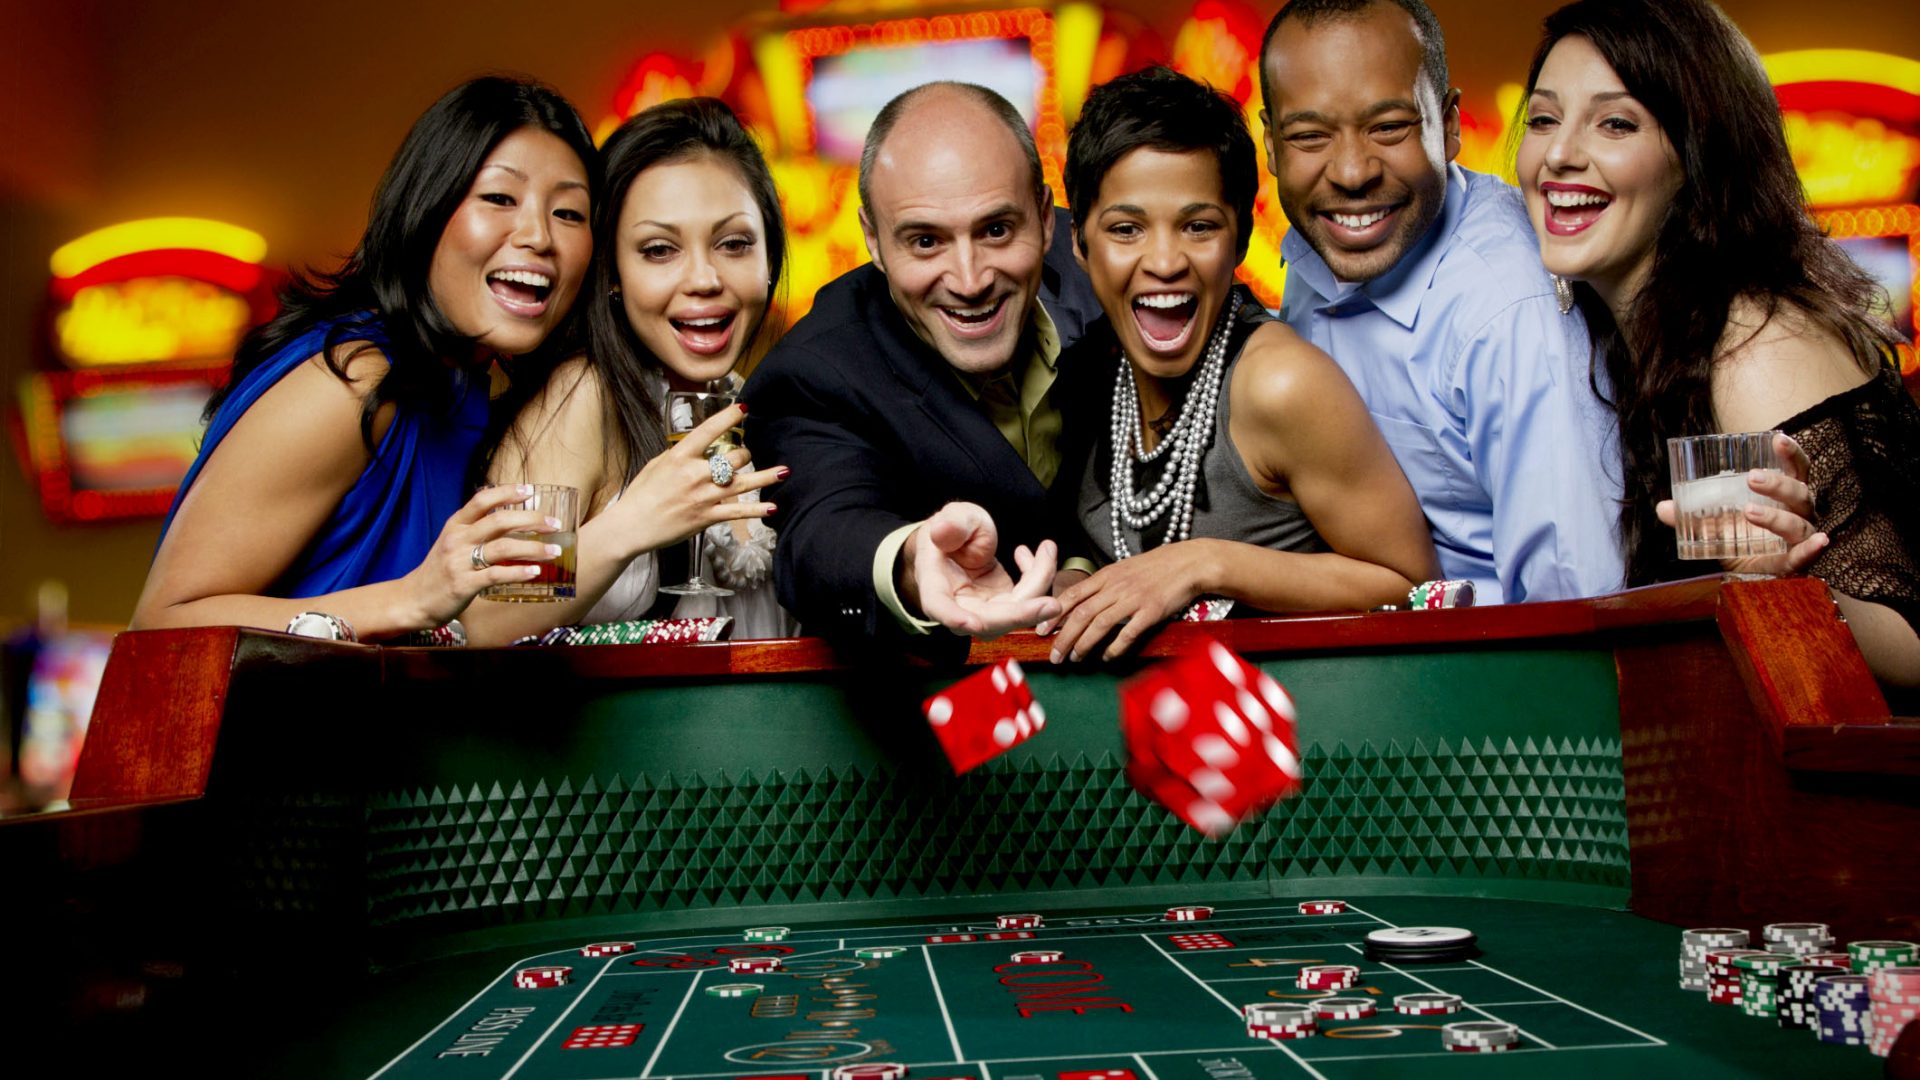 playing the online casino games.